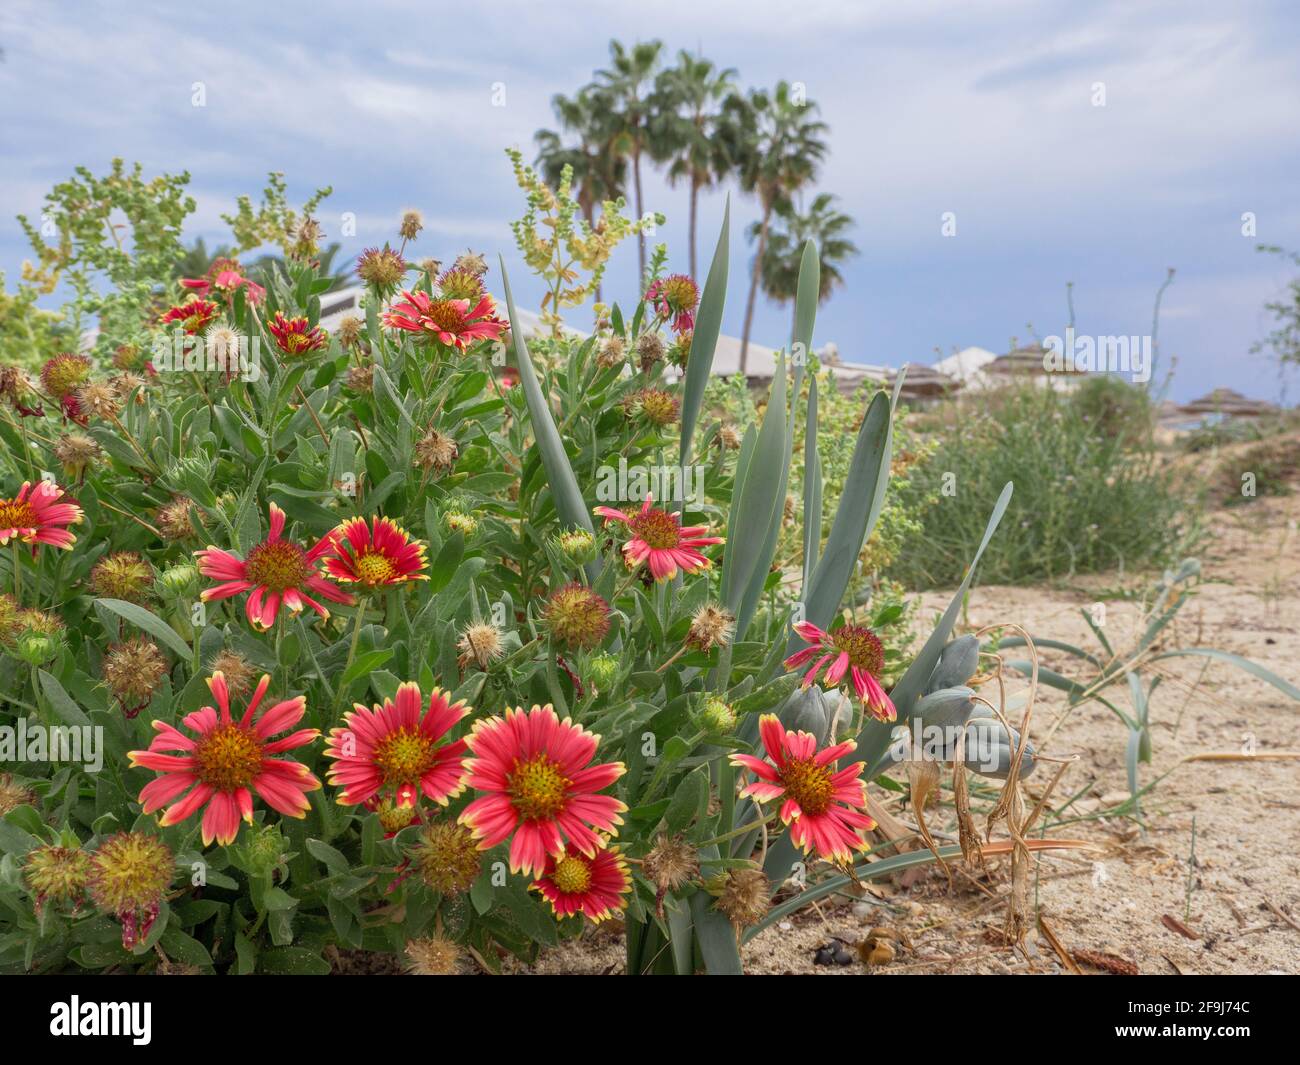 Blanketflowers (Gaillardia aristata) with red and yellow petals bloom in near Mediterranean sea on Nissi beach in Ayia Napa. High palm trees behind. Stock Photo